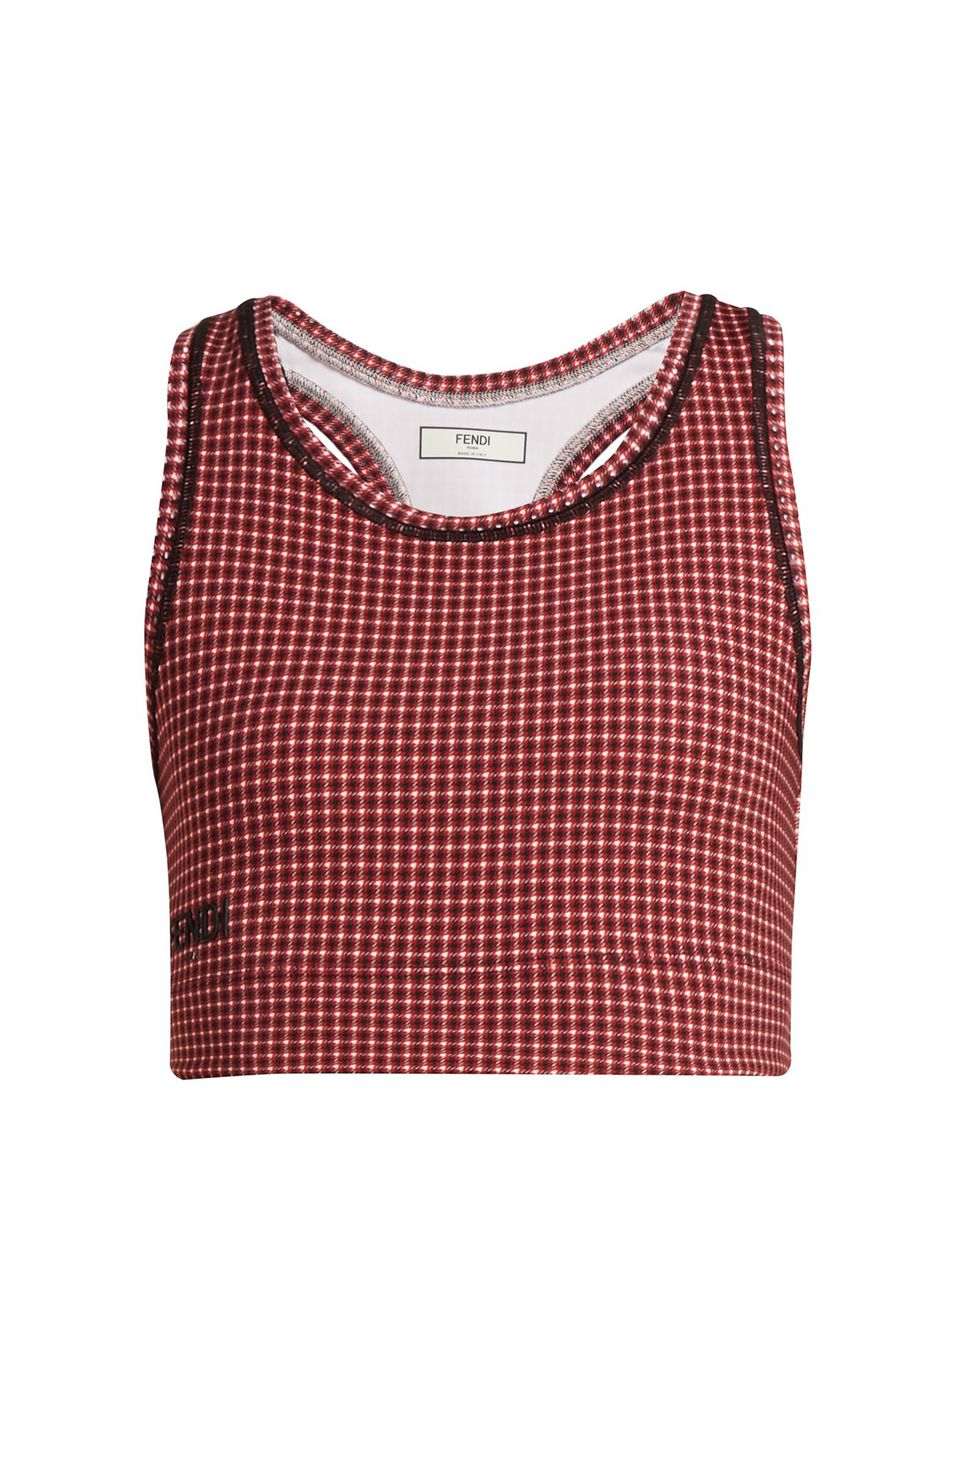 Clothing, Crop top, Maroon, Sweater vest, Outerwear, Sleeve, Blouse, Pattern, Shirt, T-shirt, 